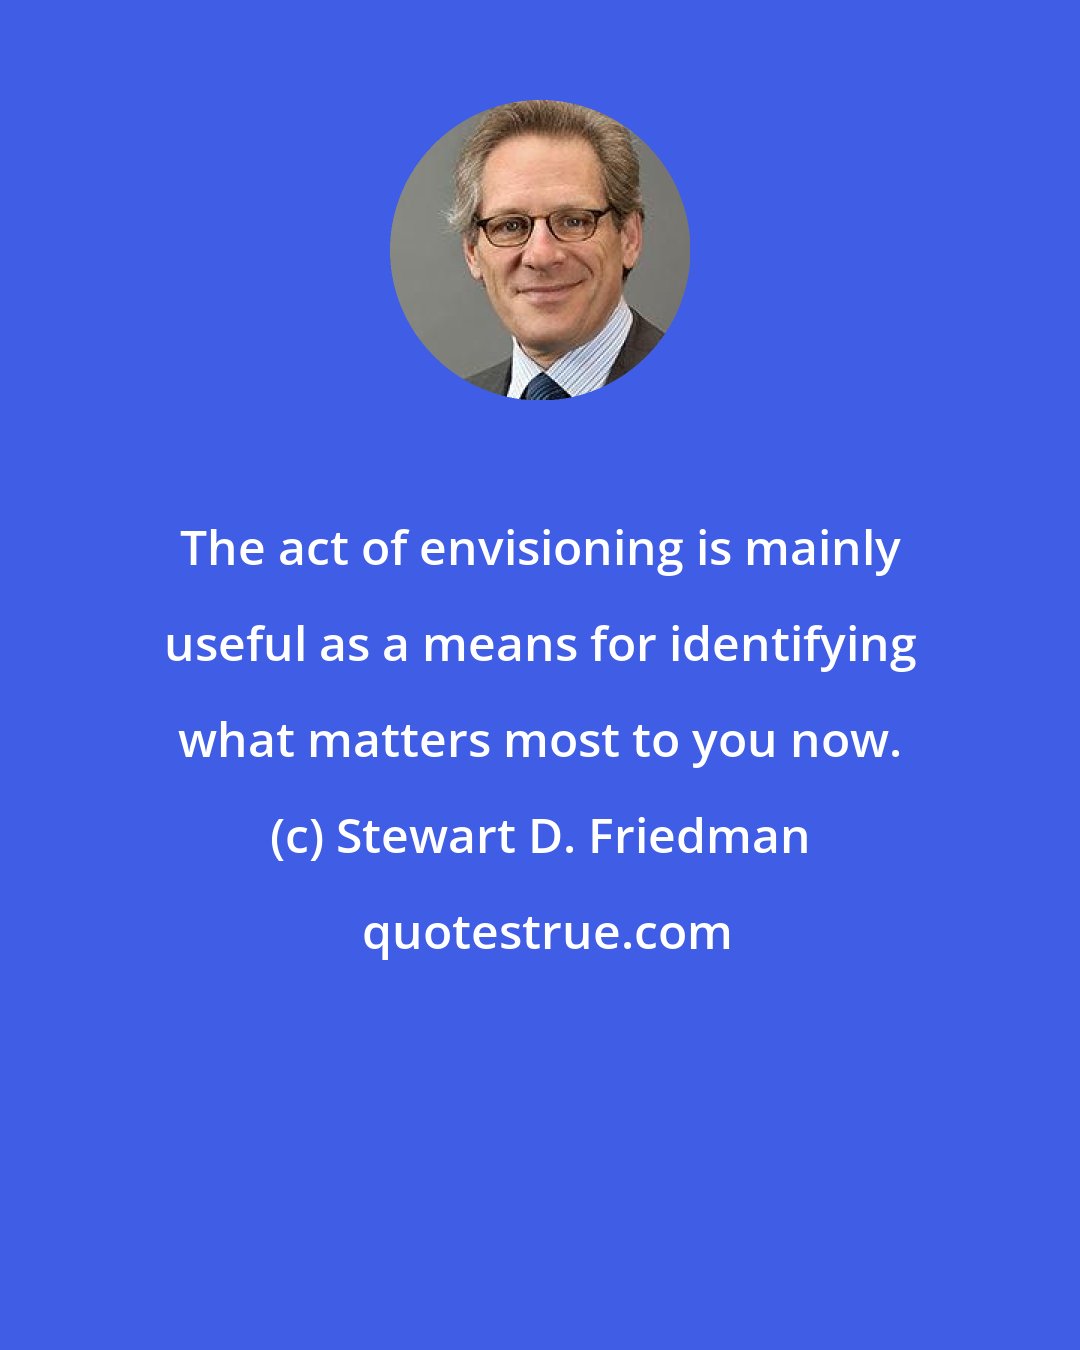 Stewart D. Friedman: The act of envisioning is mainly useful as a means for identifying what matters most to you now.